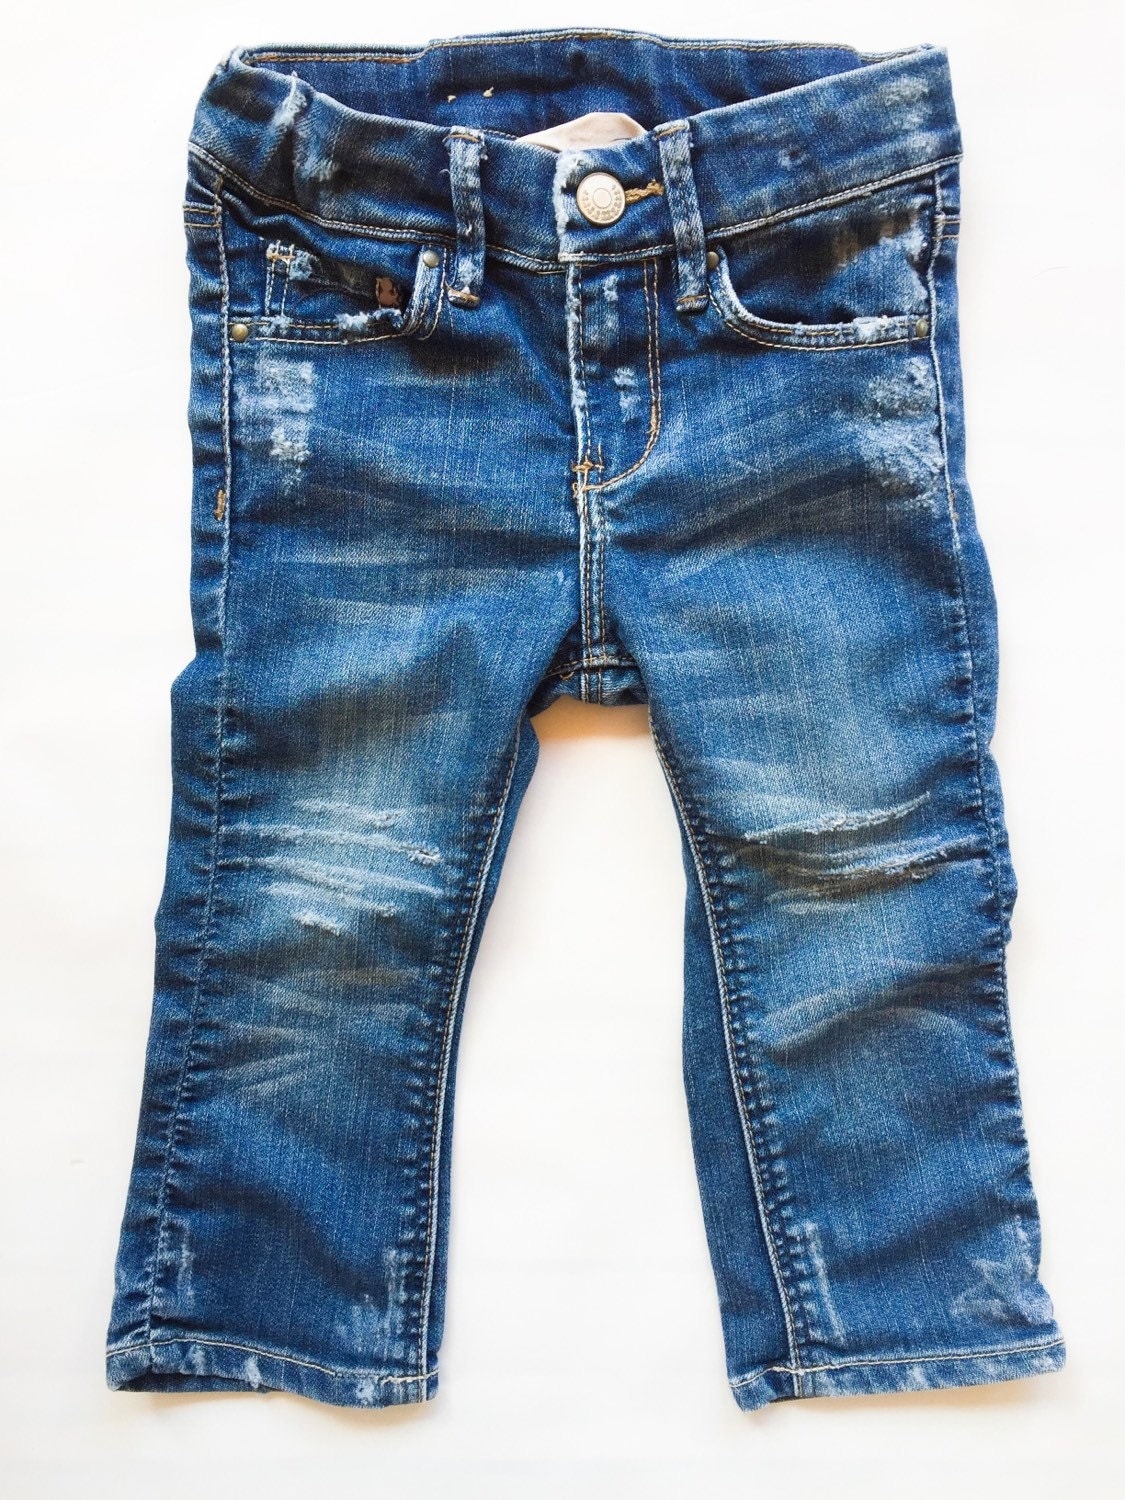 Size 24 months. Toddler jeans. Distressed jeans. Toddler girl